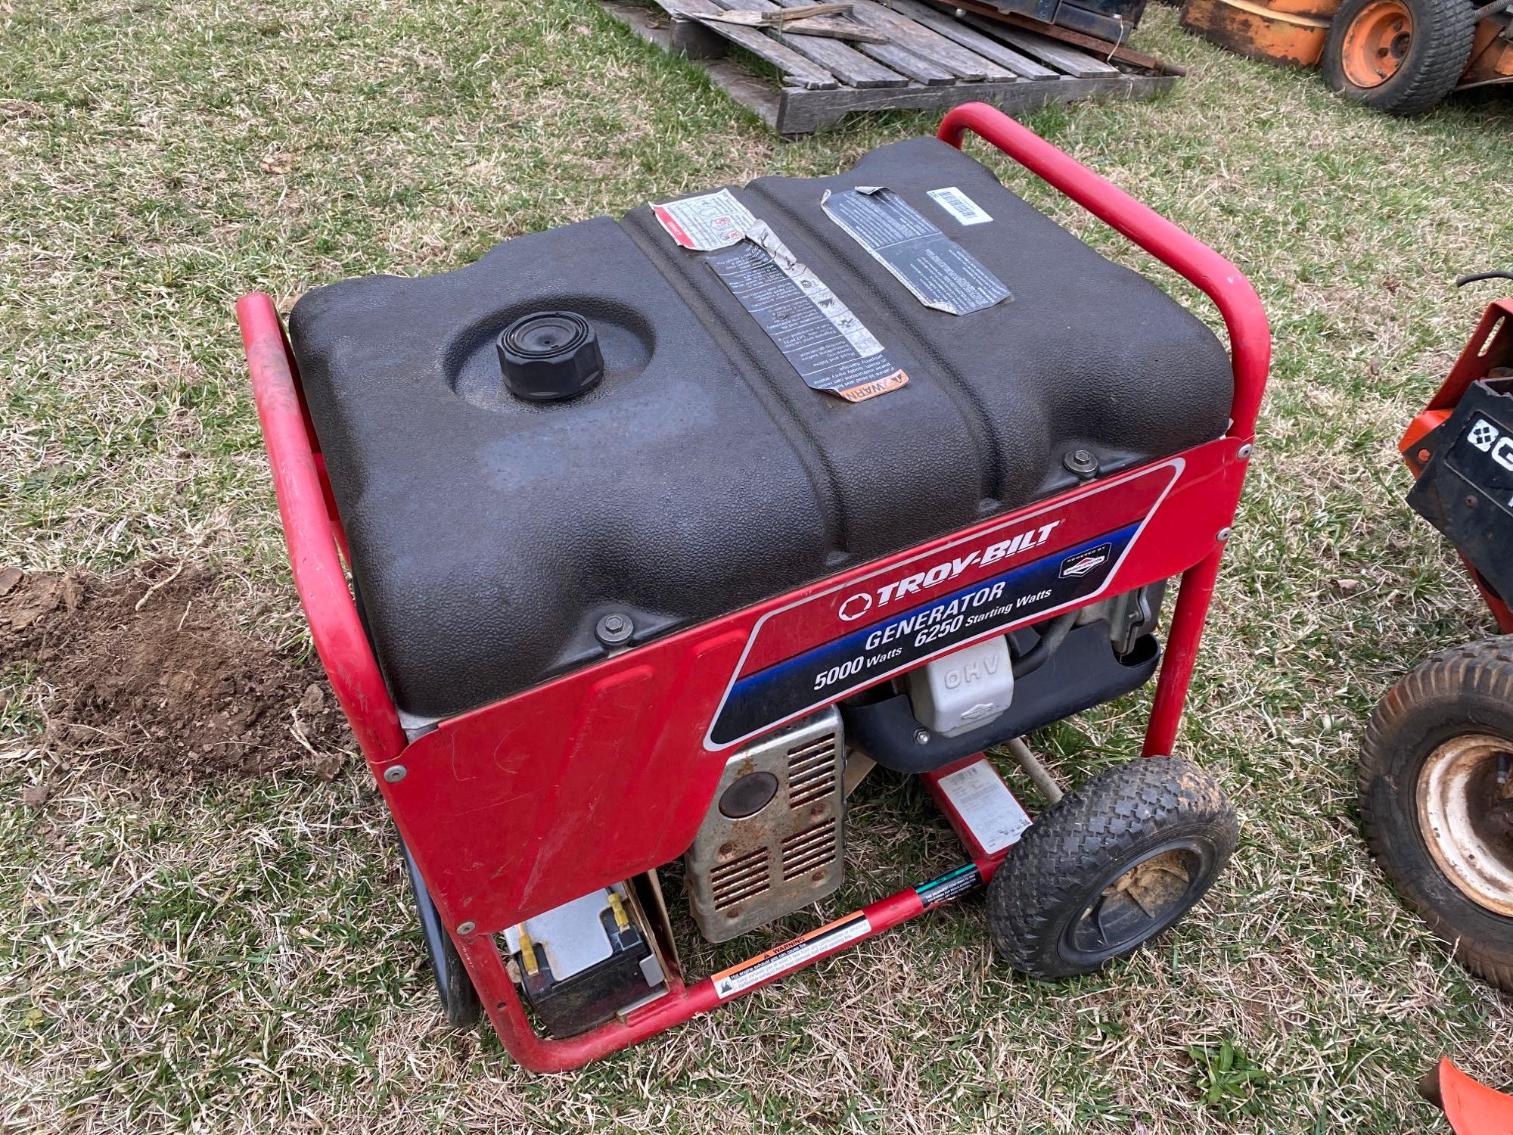 Image for Troy Bilt Generator 5000 watt, does not run at this time